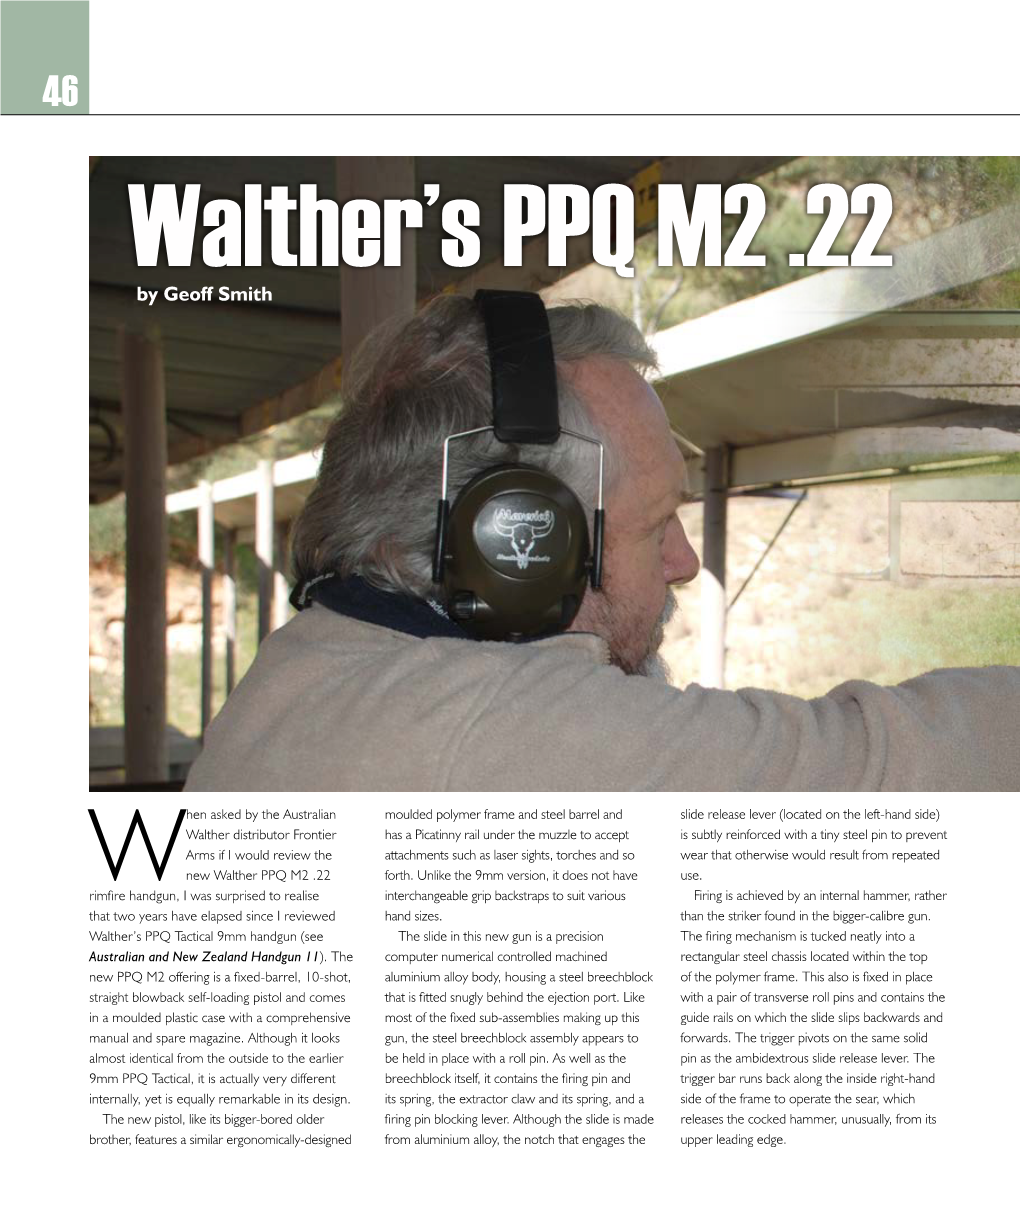 Walther's PPQ M2